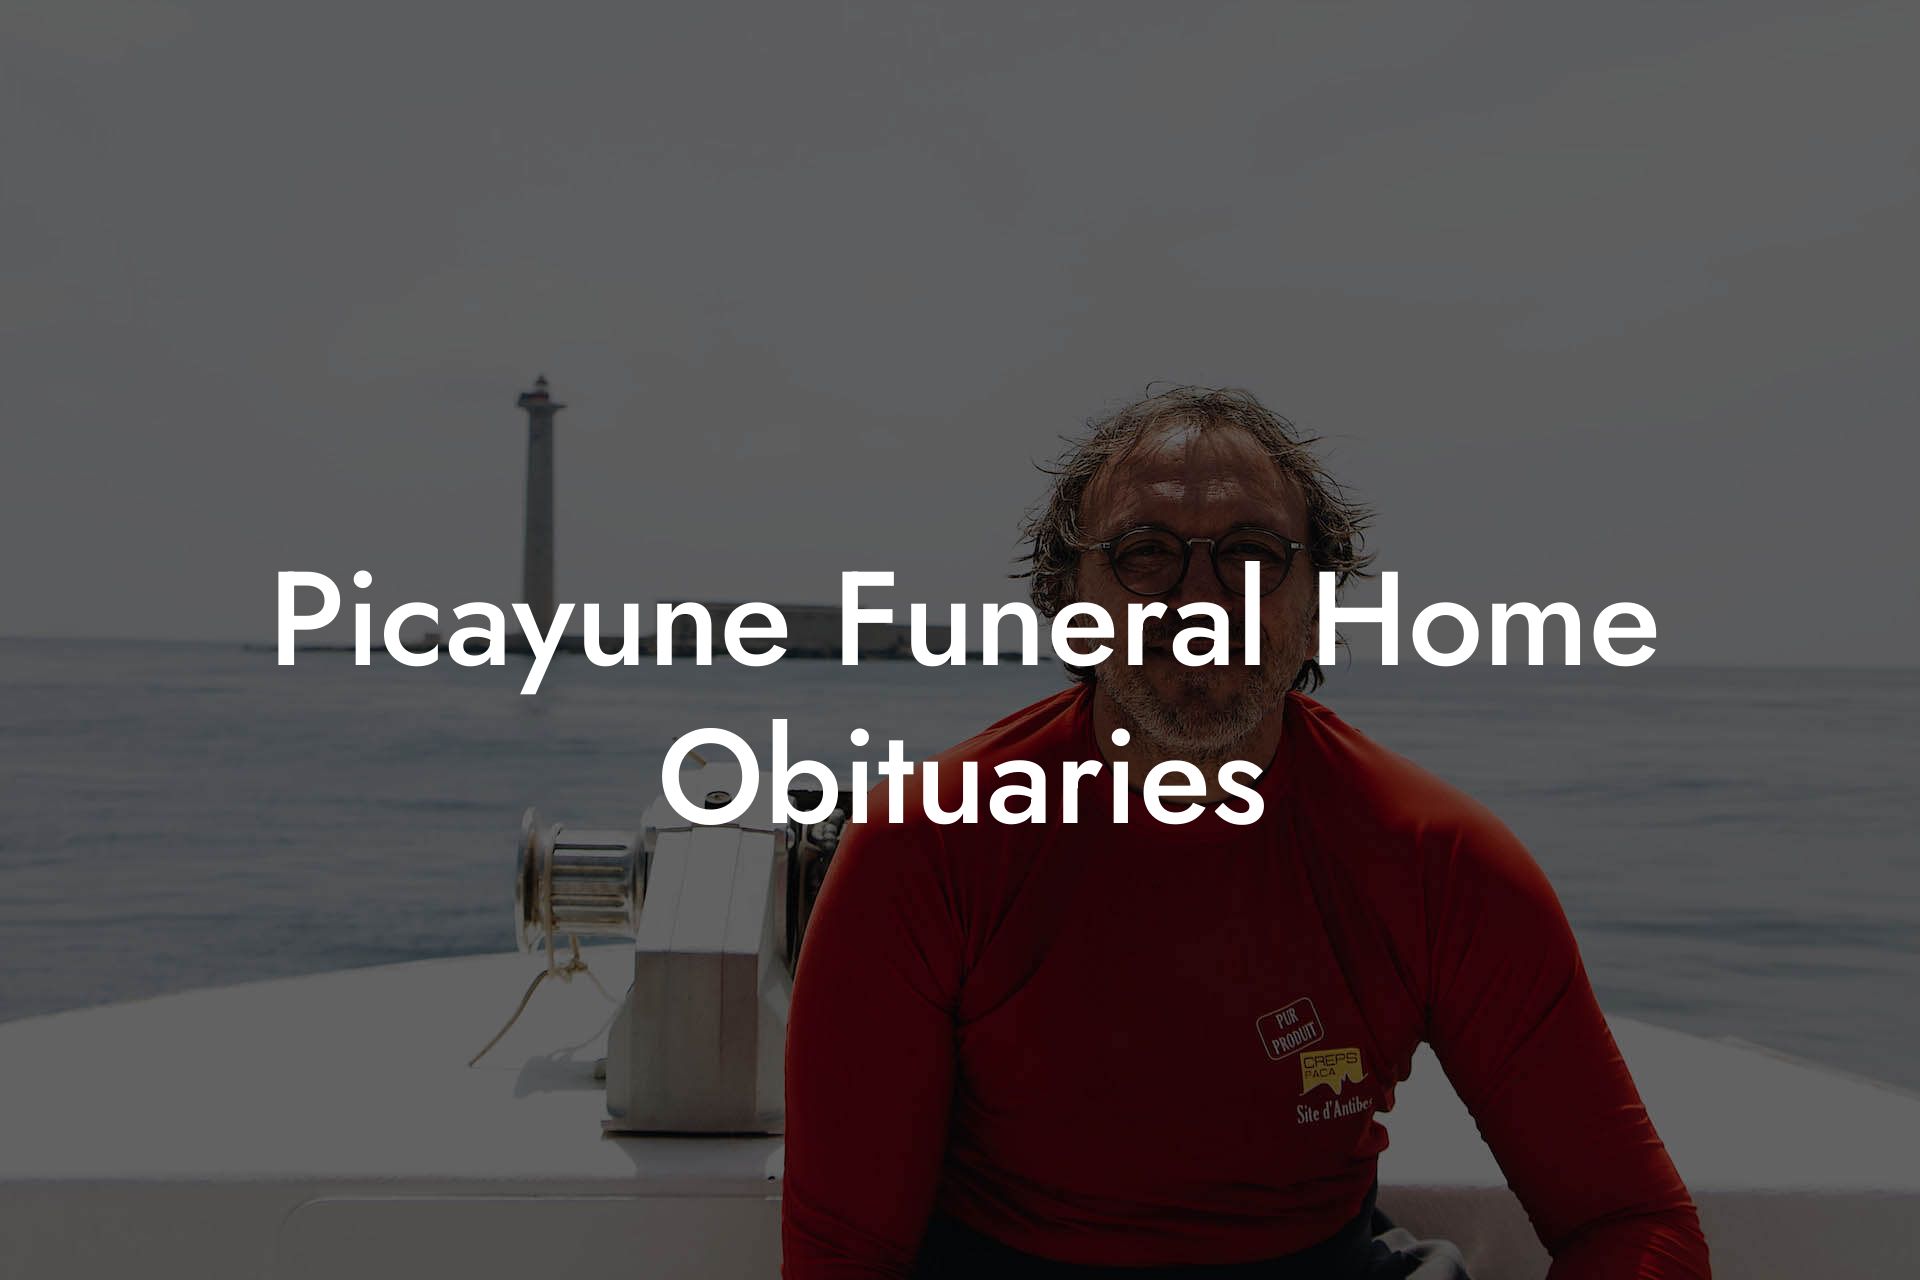 Picayune Funeral Home Obituaries